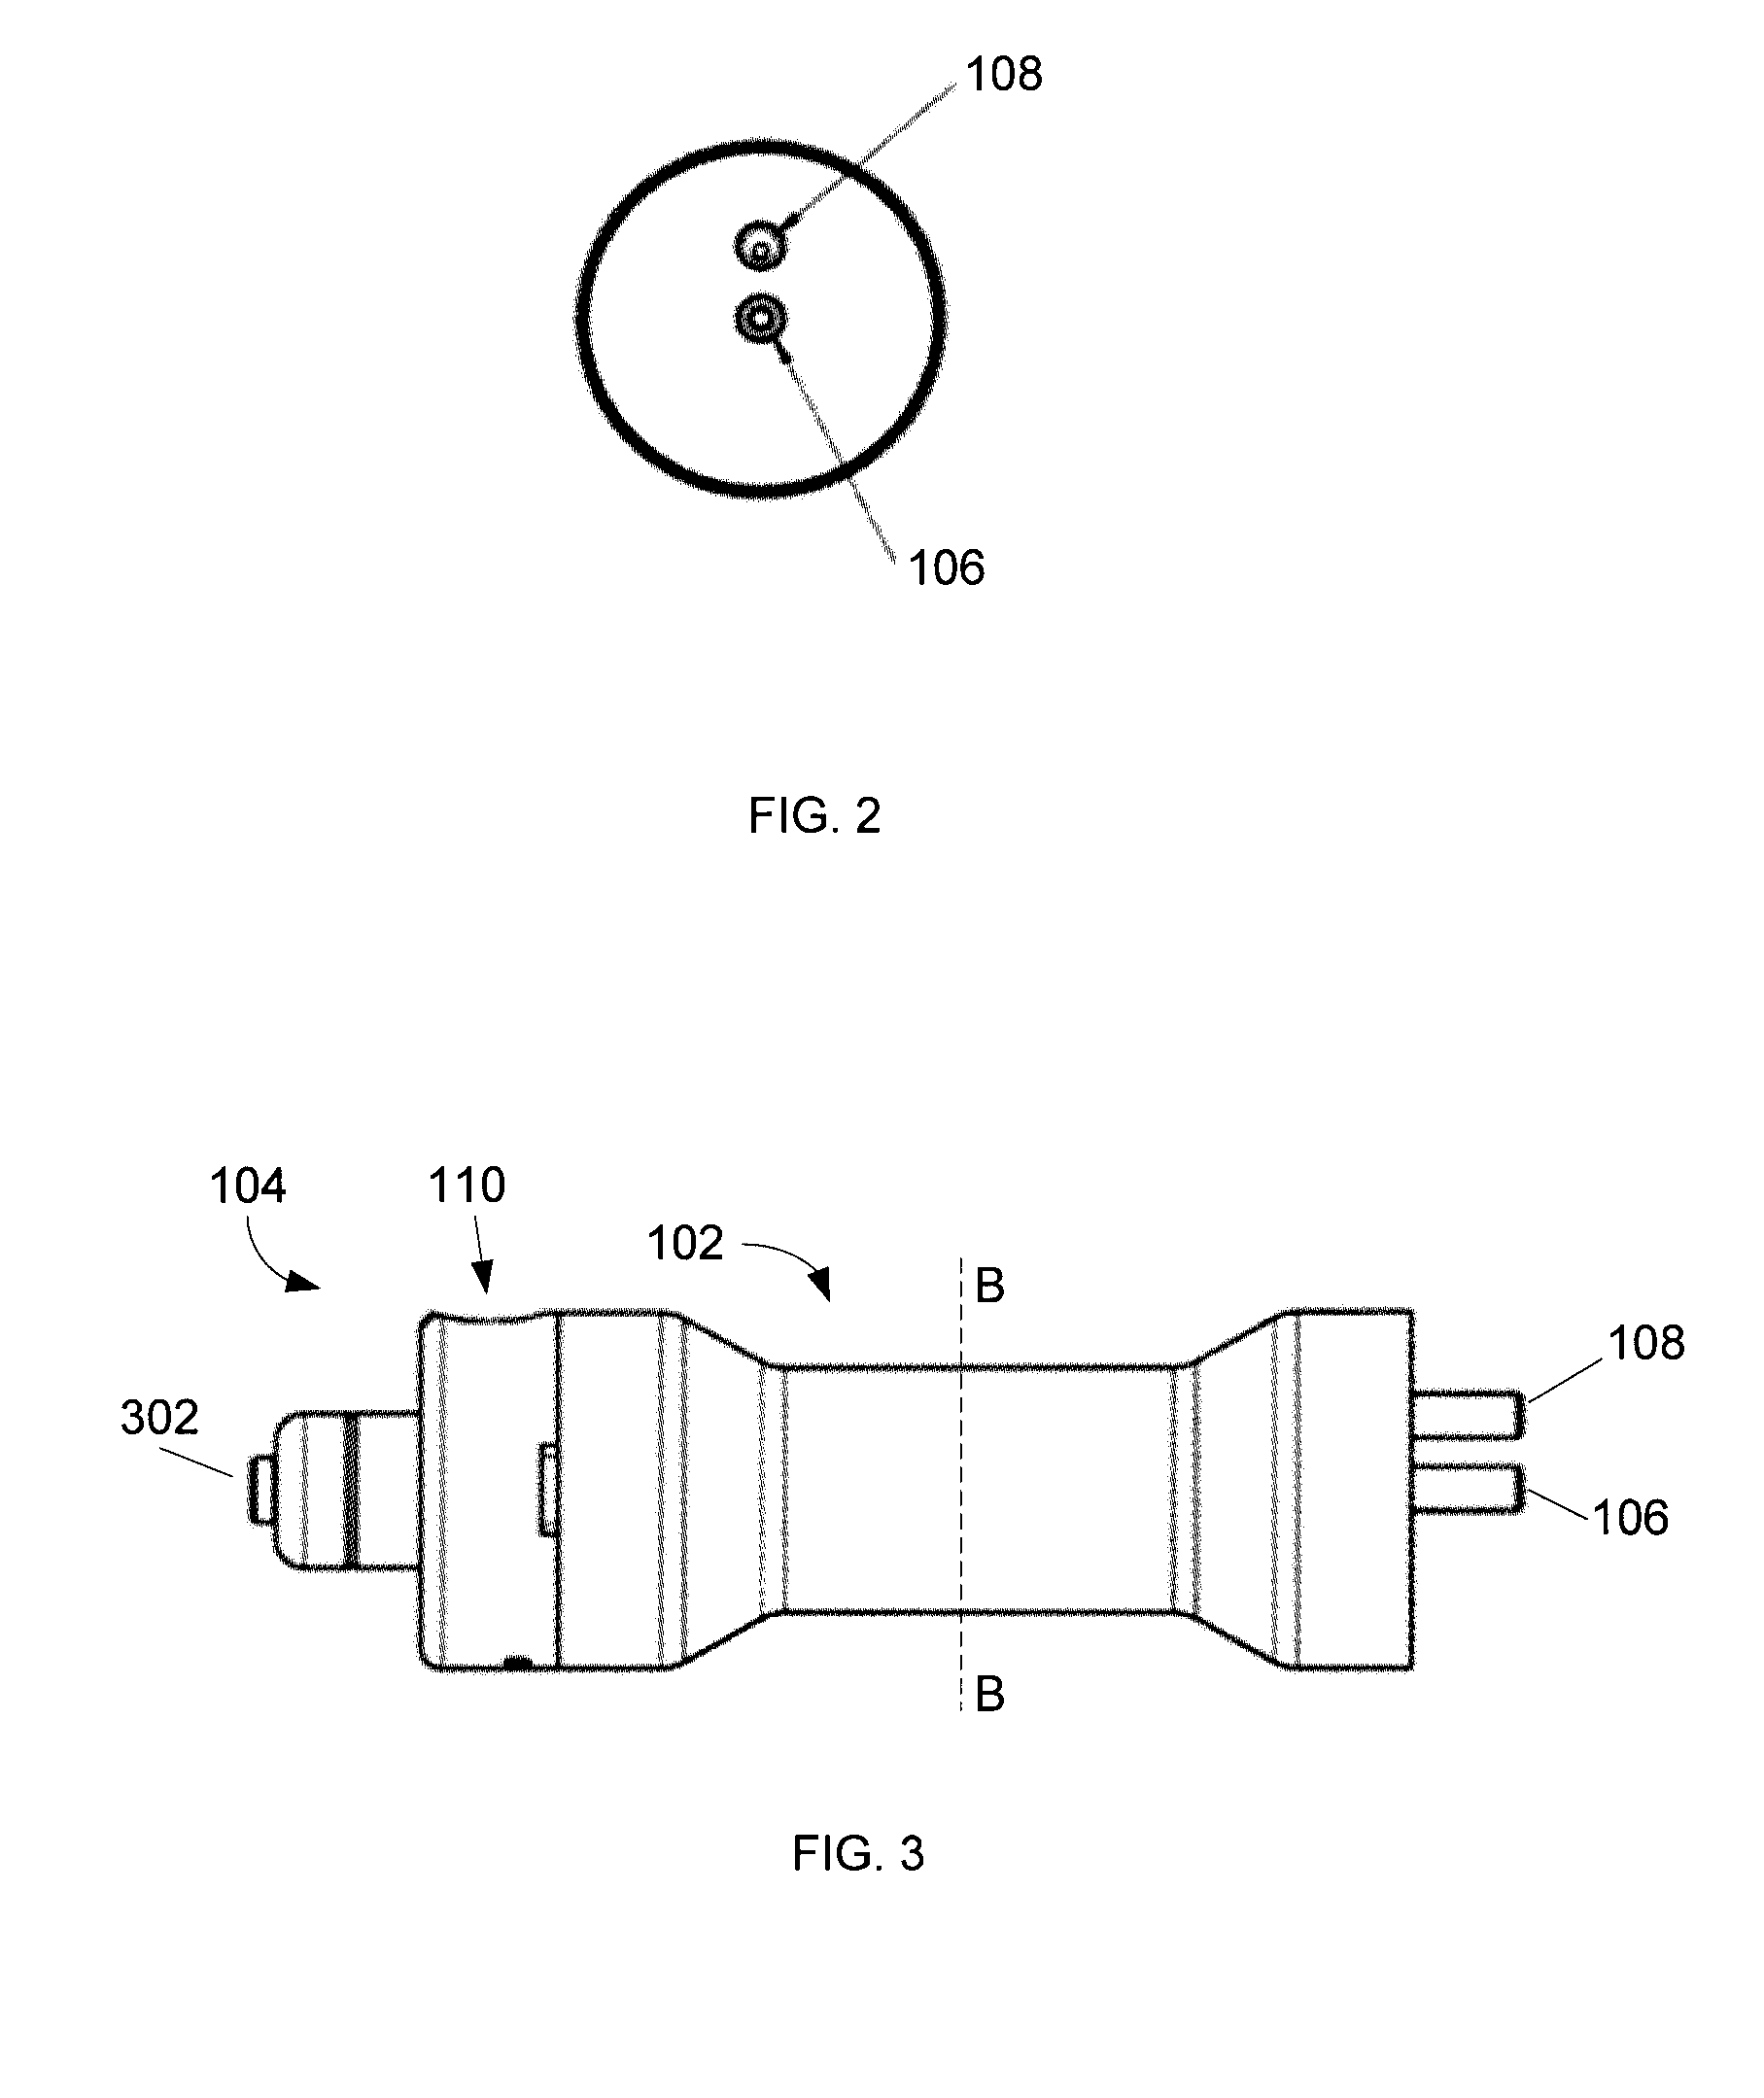 Method and System for Detecting Vapors